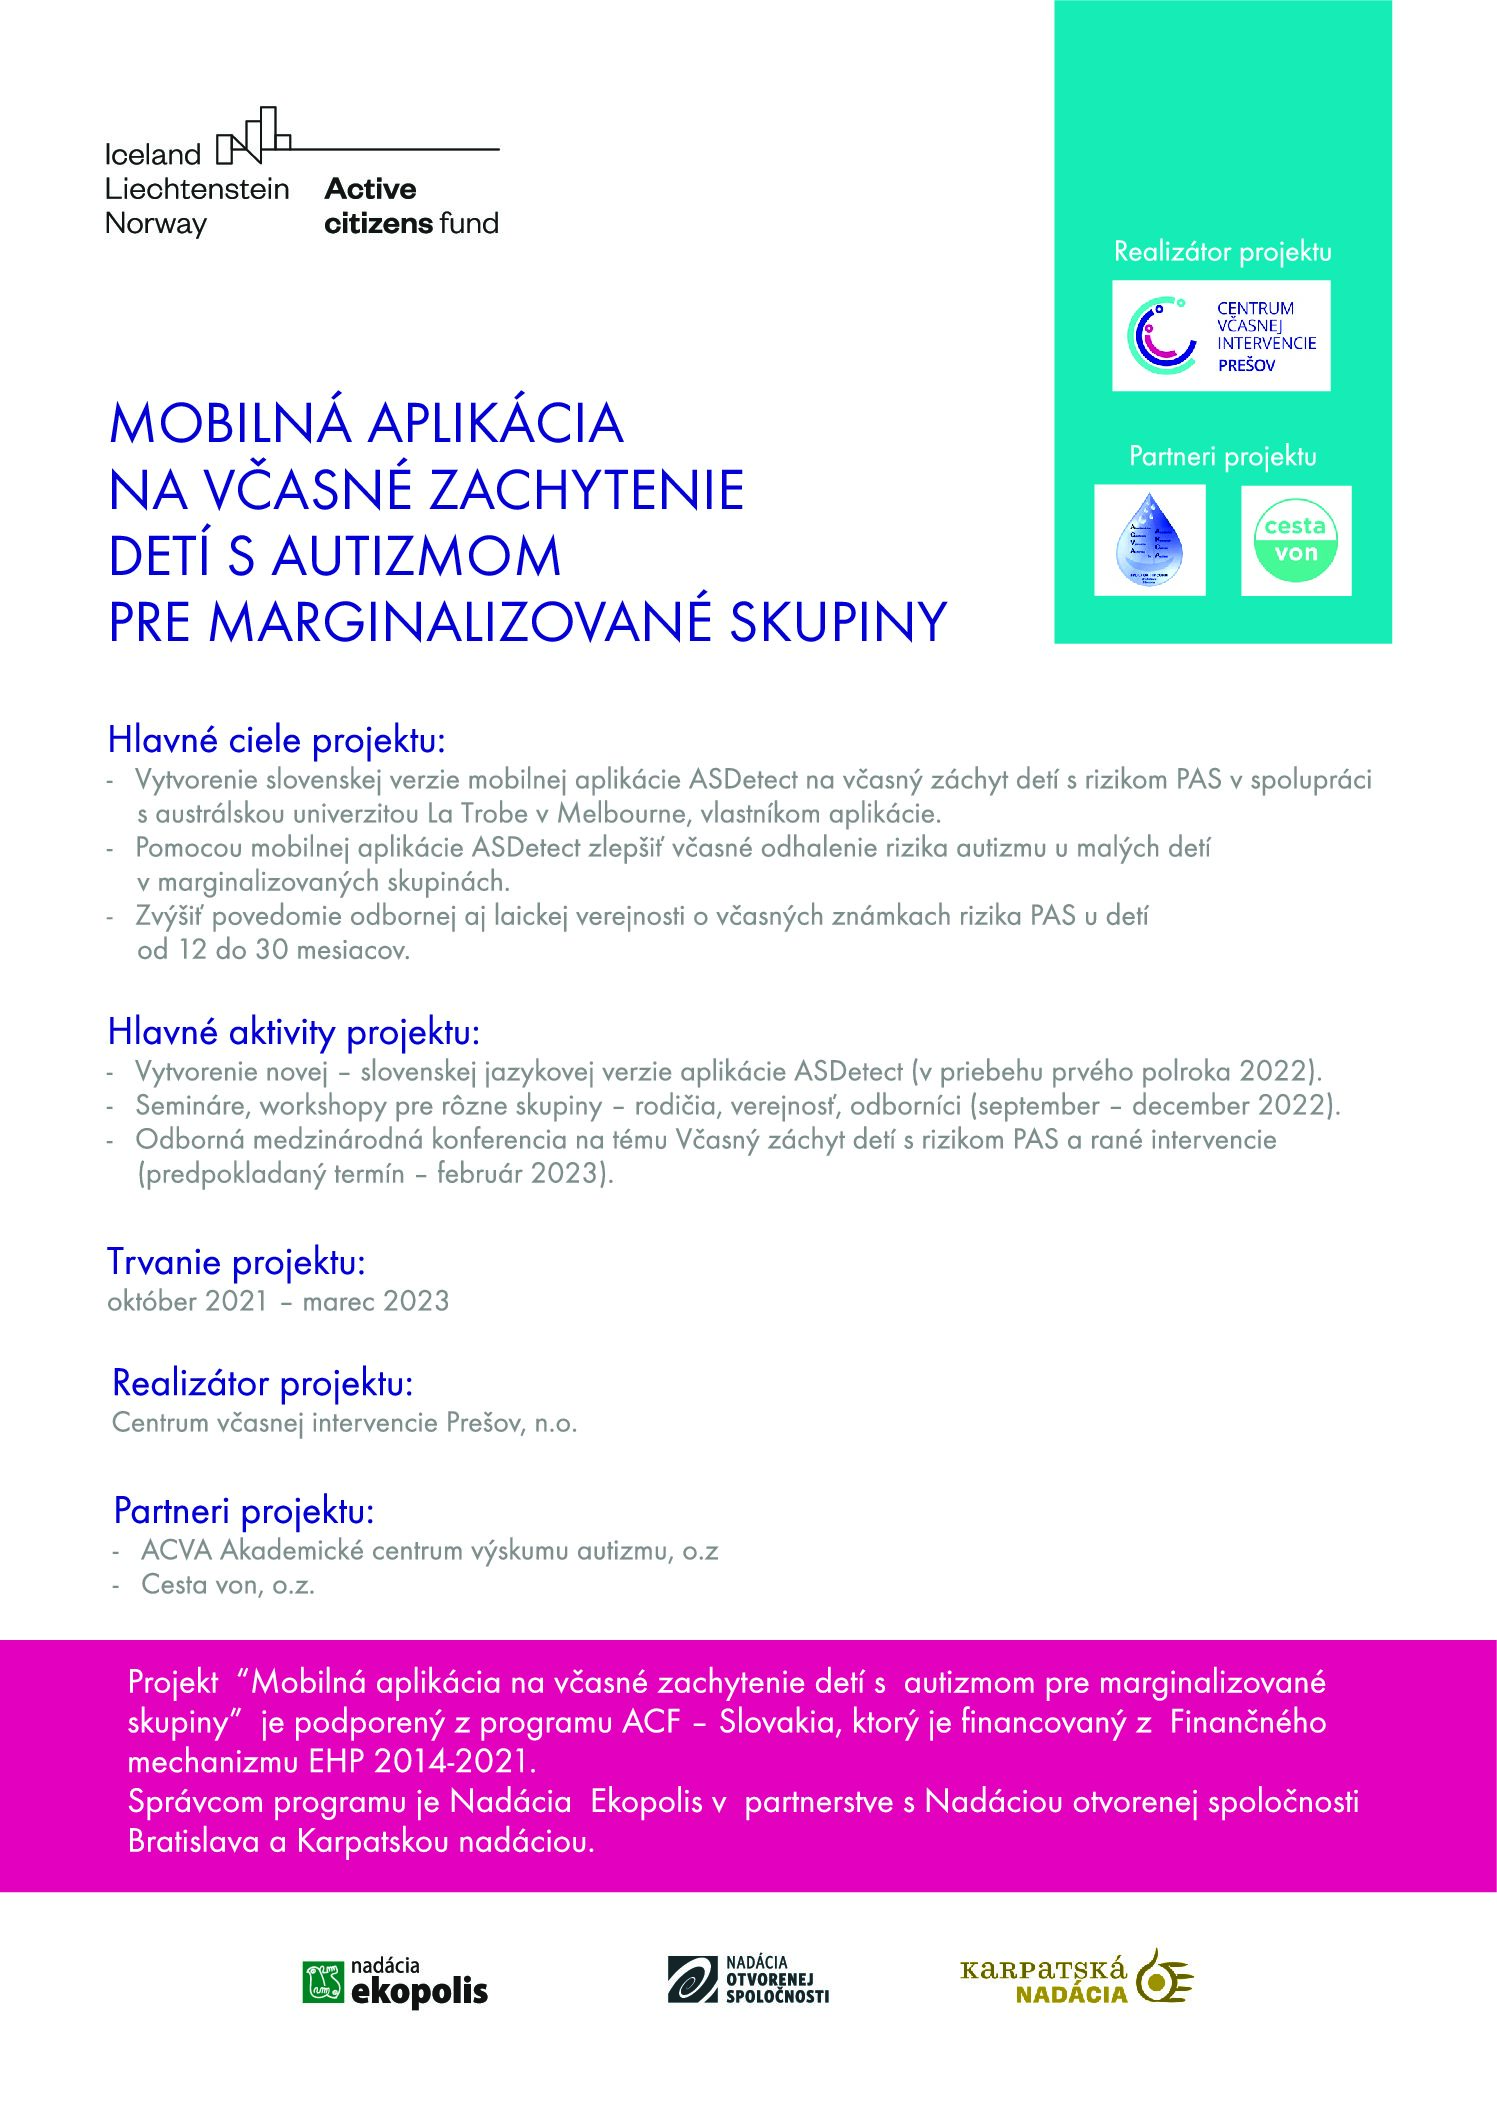 ARCA partner of the projects “Mobile application for early detection of children with autism for marginalized groups”